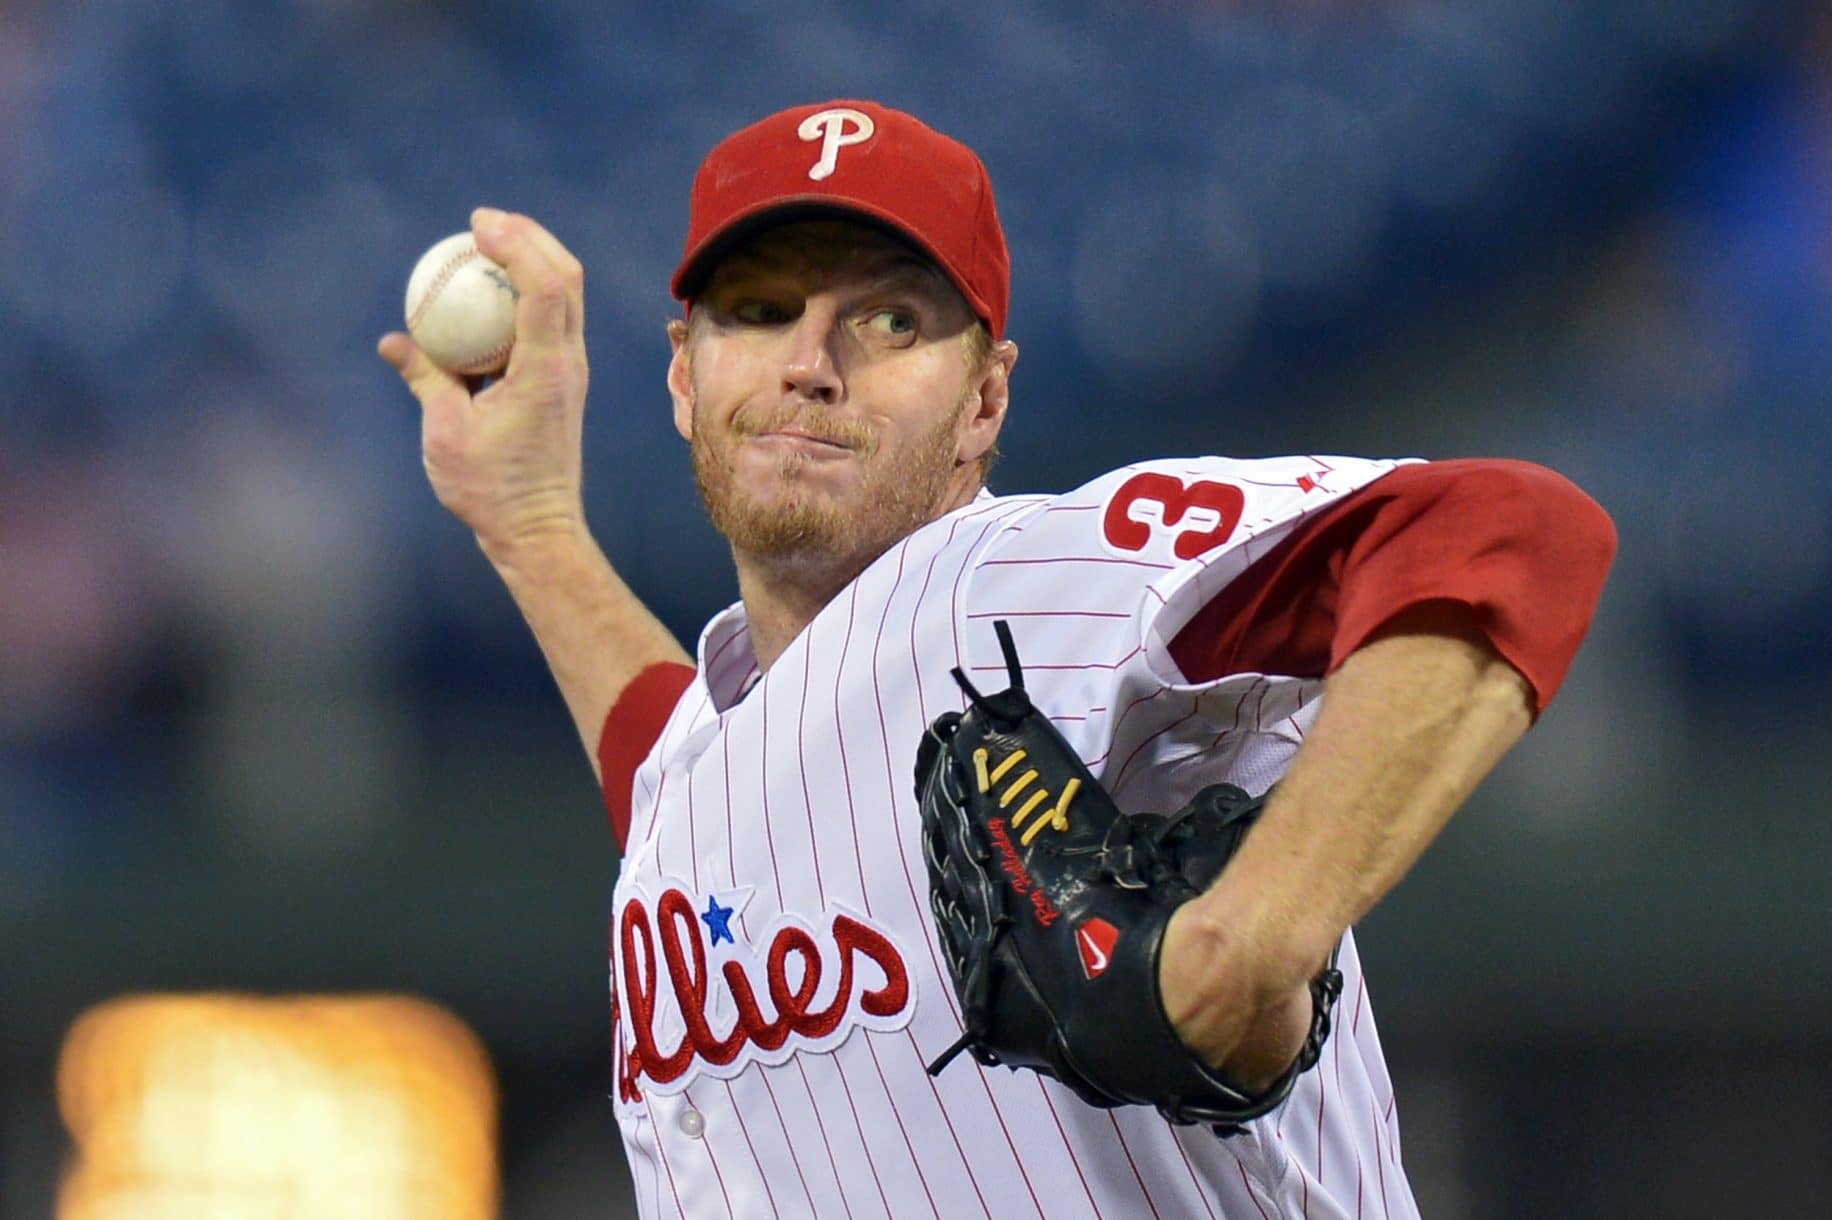 What's Up Doc? Roy Halladay should be part of 2018 Hall of Fame class